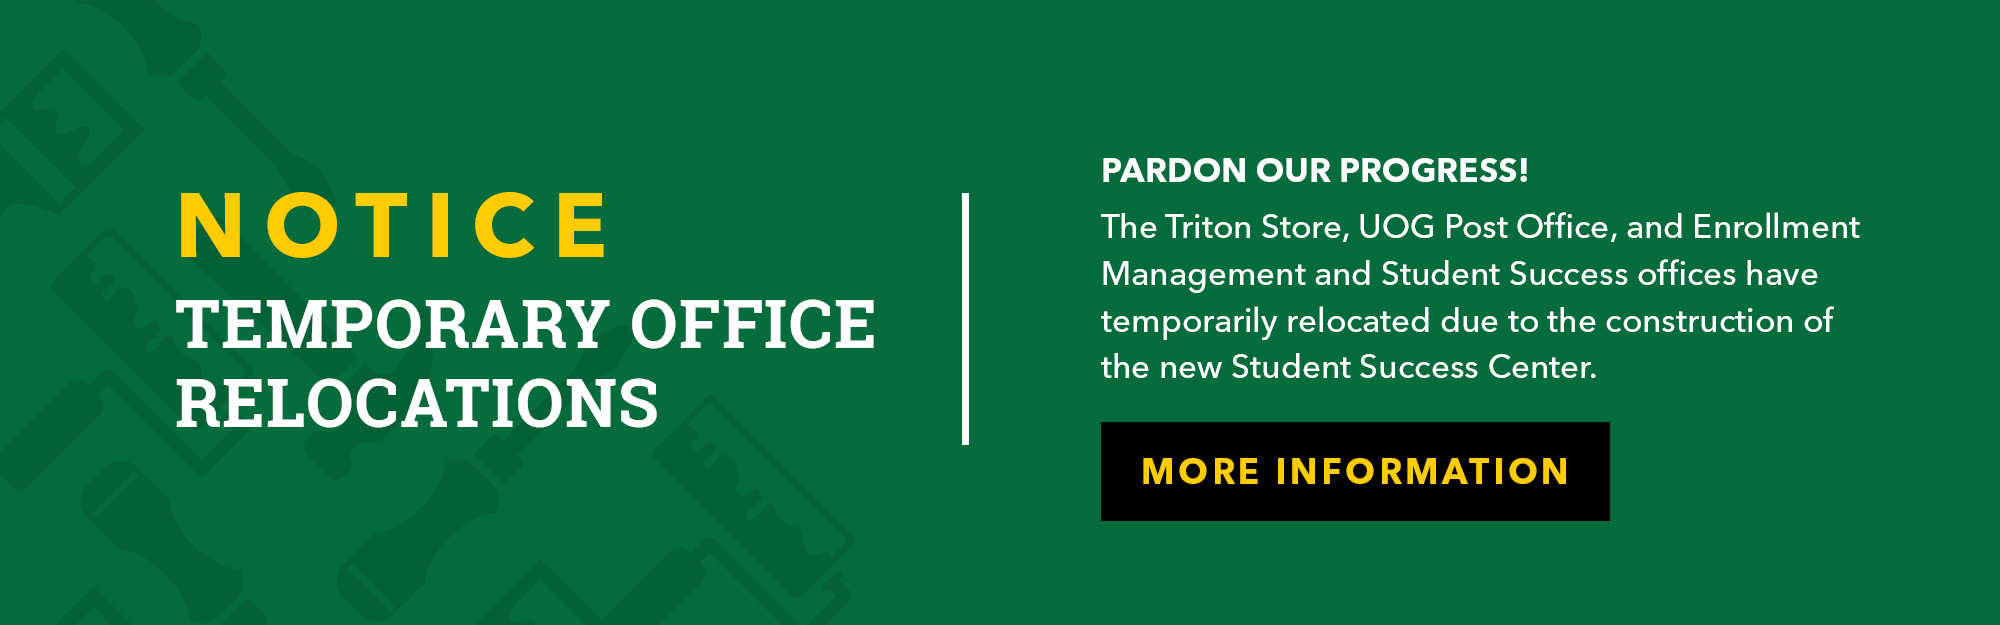 New, temporary locations for Post Office, Triton Store, Student Services offices announced